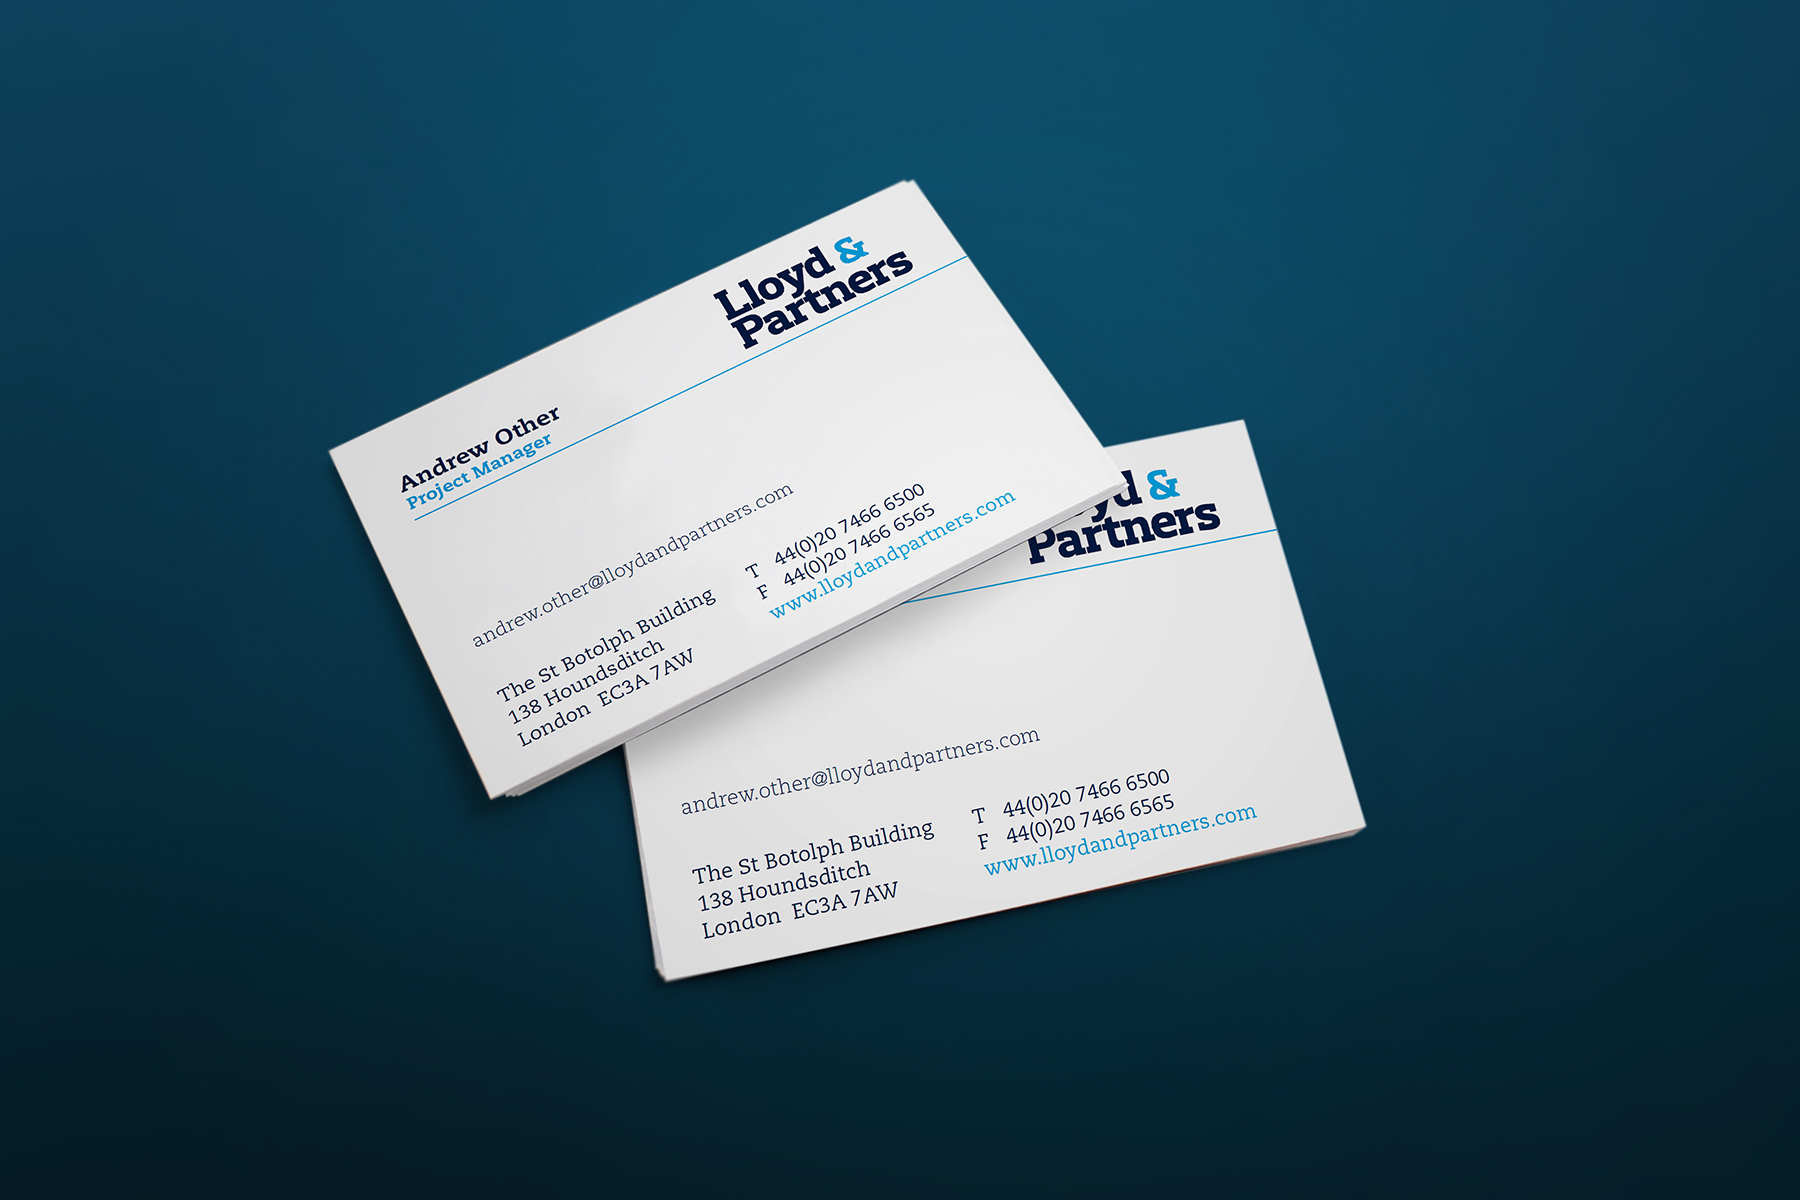 The business card is clear and concise, letting the other printed communications do the speaking.